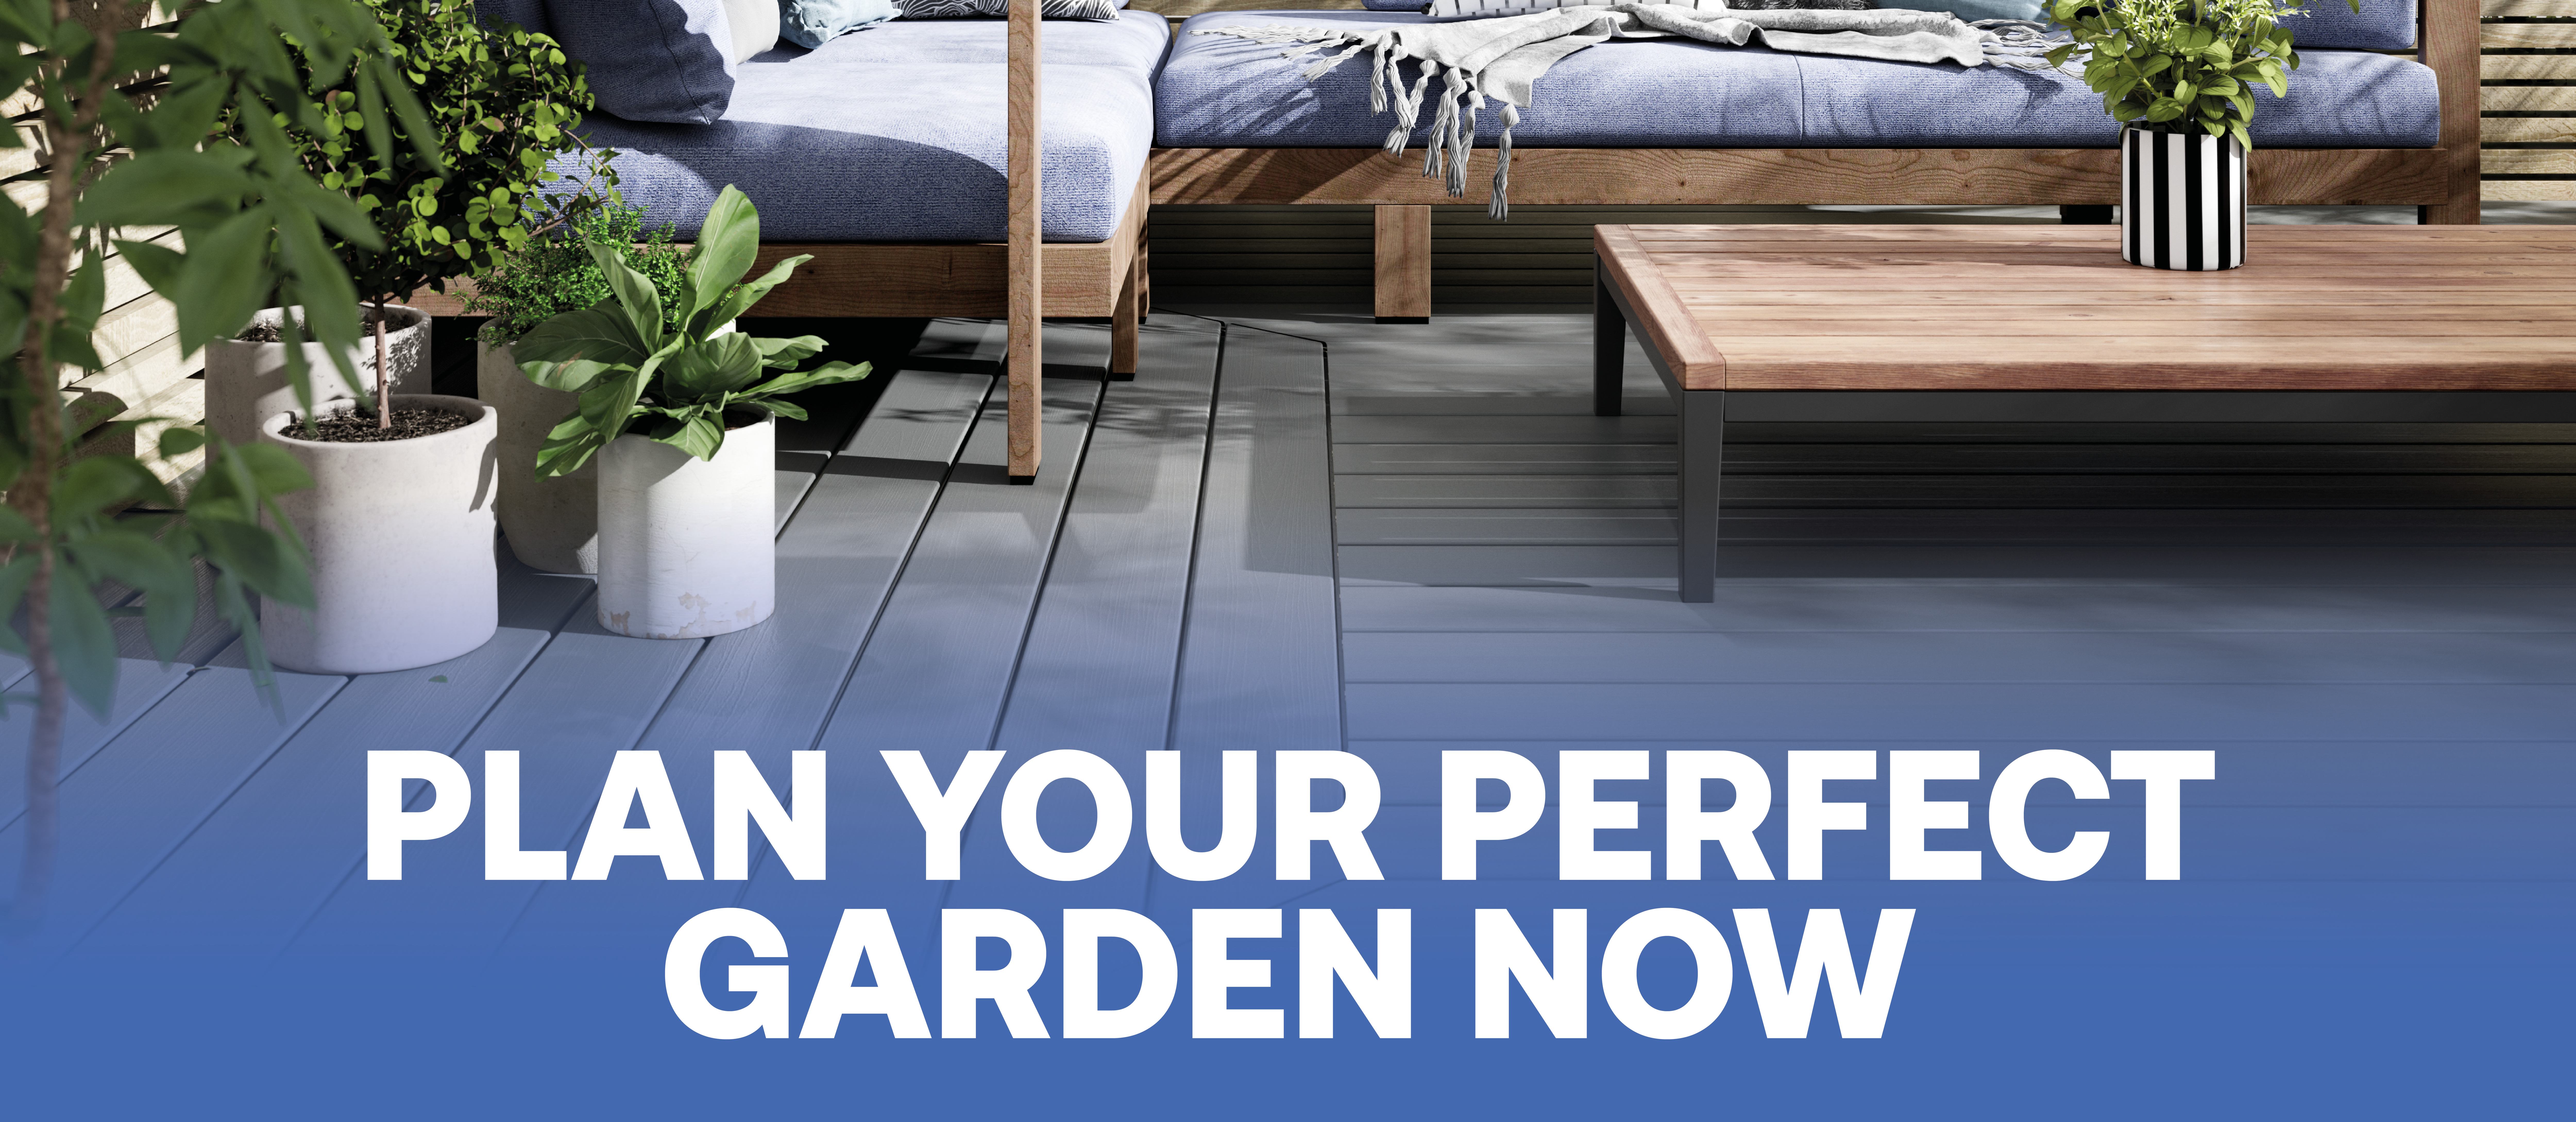 Plan your perfect garden now and enjoy it in the spring!